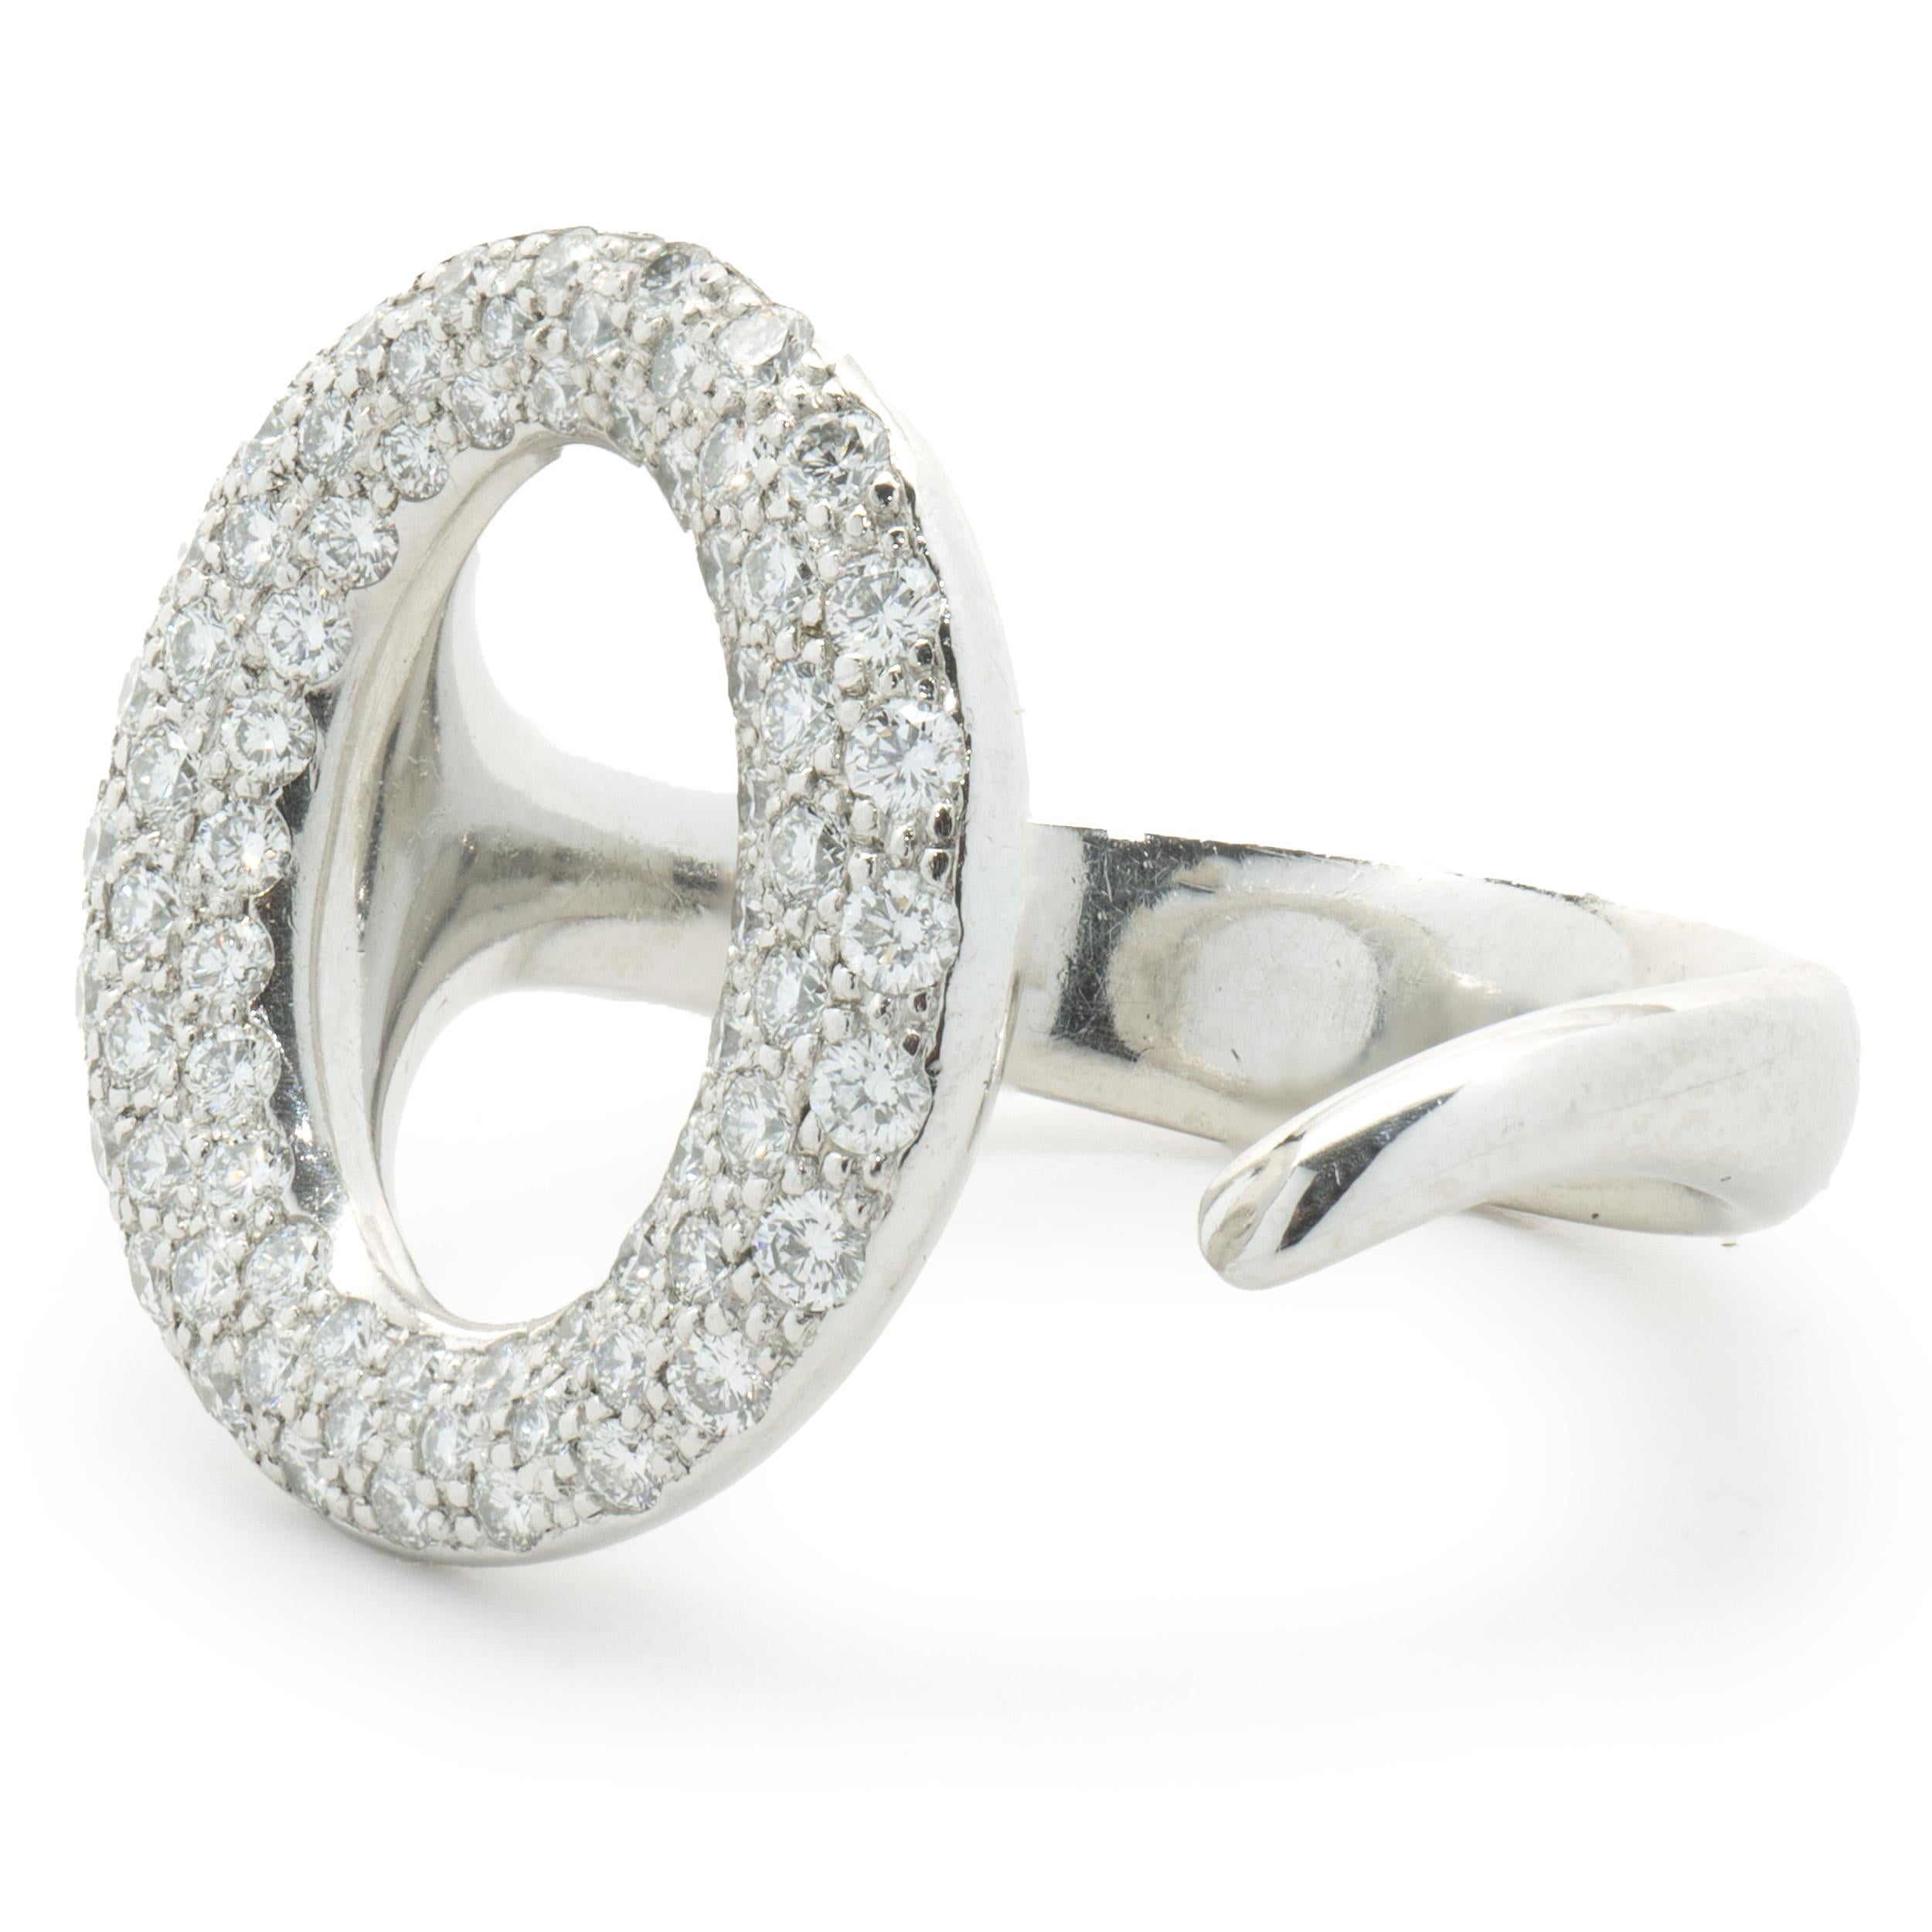 Designer: Tiffany & Co. / Elsa Peretti
Material: platinum
Diamond: 72 round brilliant cut = 0.80cttw
Color: G
Clarity: VS1-2
Dimensions: ring top measures 18.7mm wide
Size: 7.5
Weight: 13.40 grams
